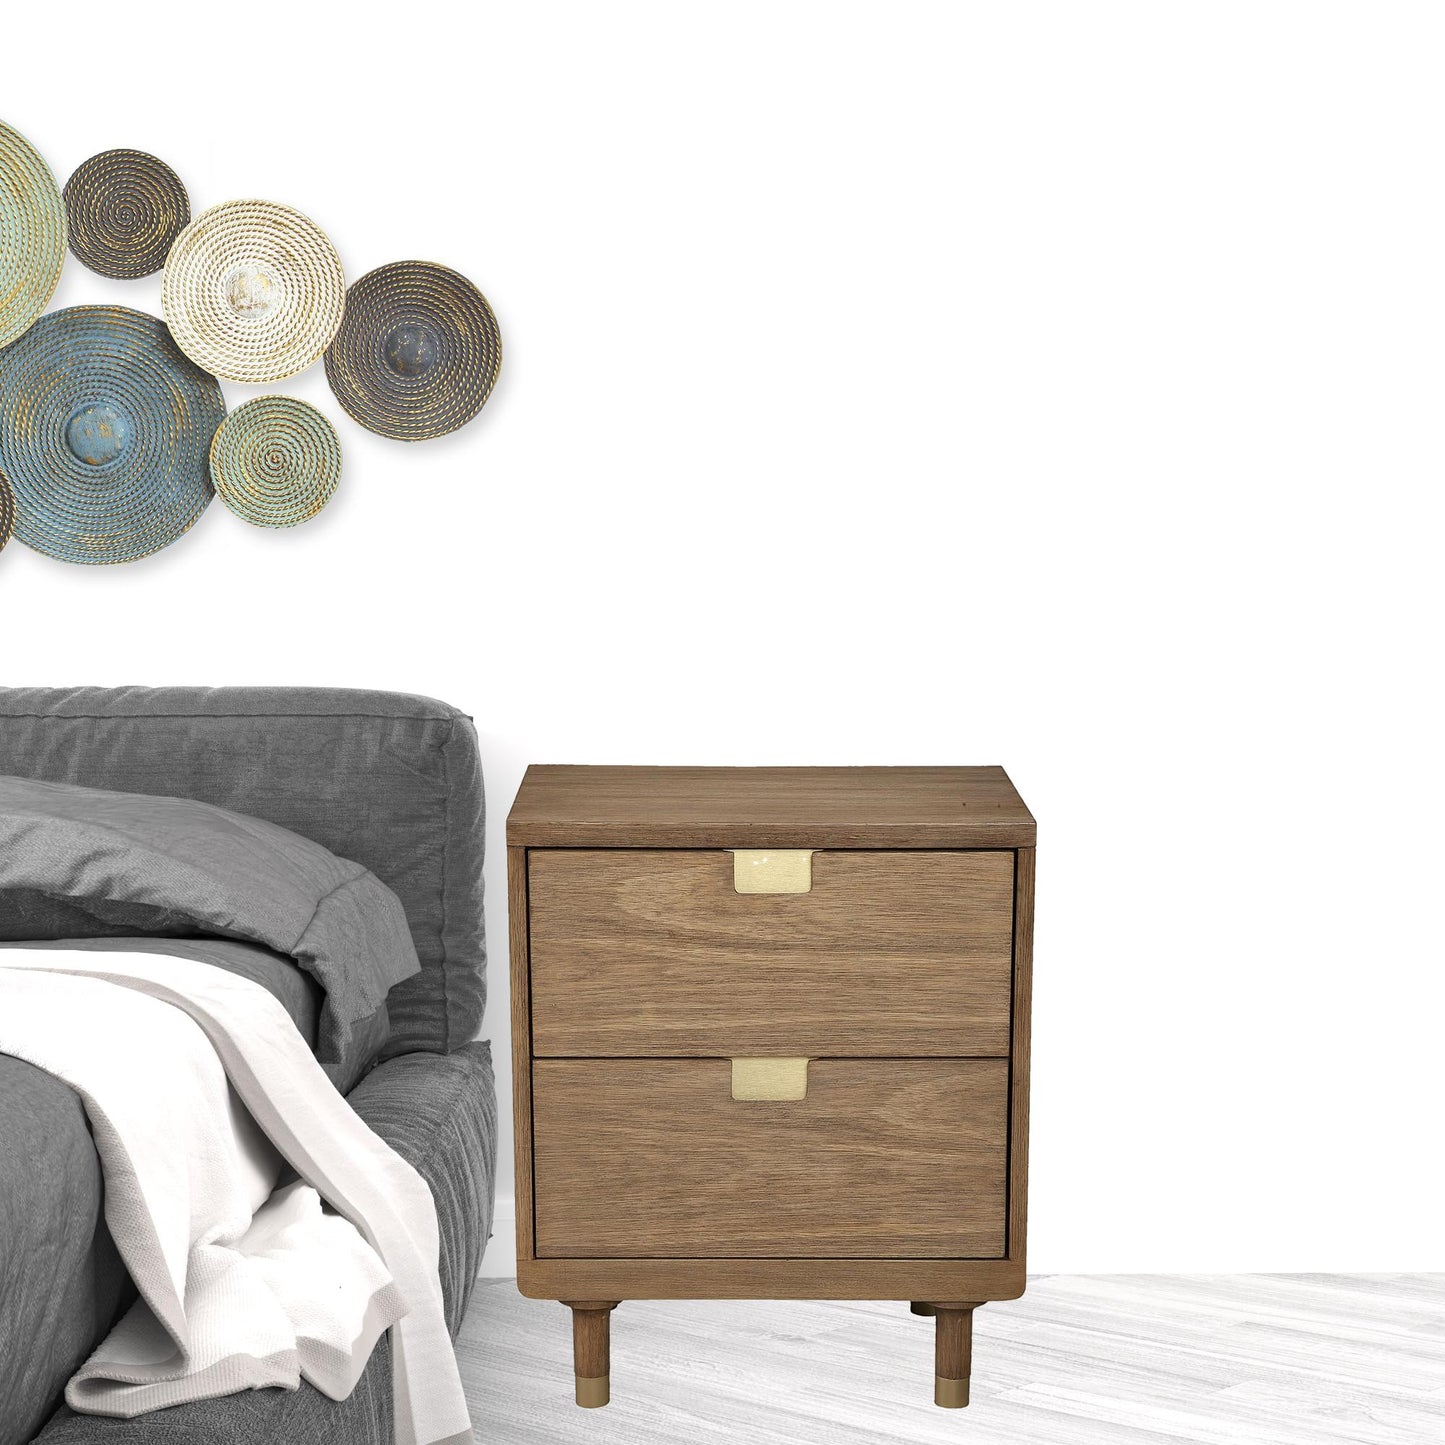 Sandy Brown and Gold 2 Drawer Nightstand